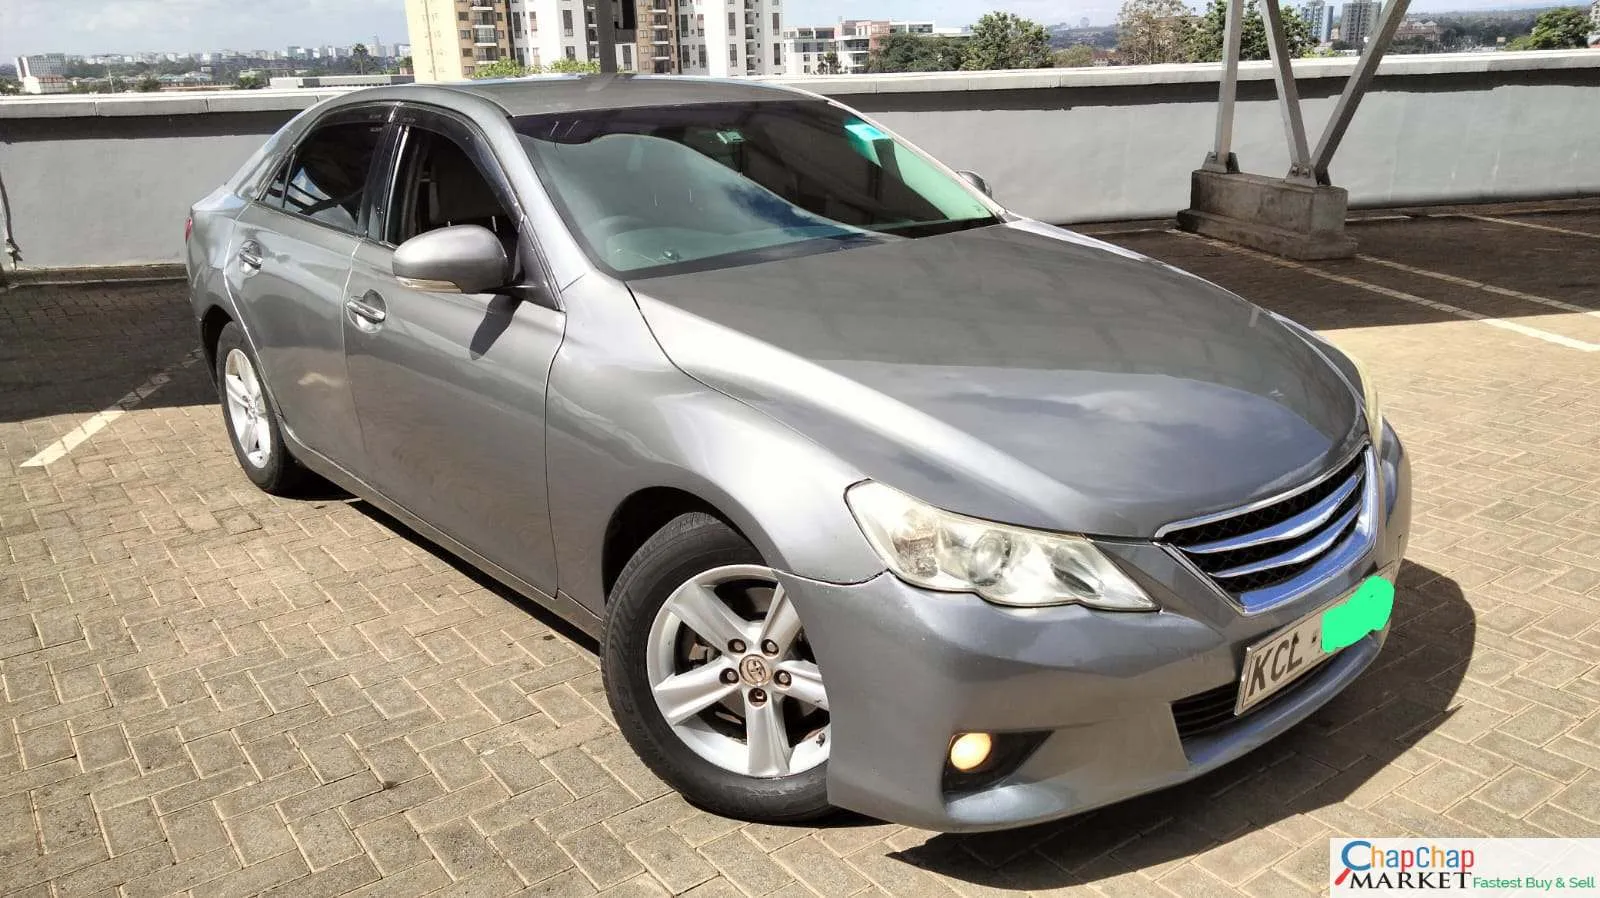 Toyota Mark X for sale in kenya QUICK SALE You Pay 30% Deposit Trade in OK For HIRE PURCHASE INSTALLMENTS EXCLUSIVE